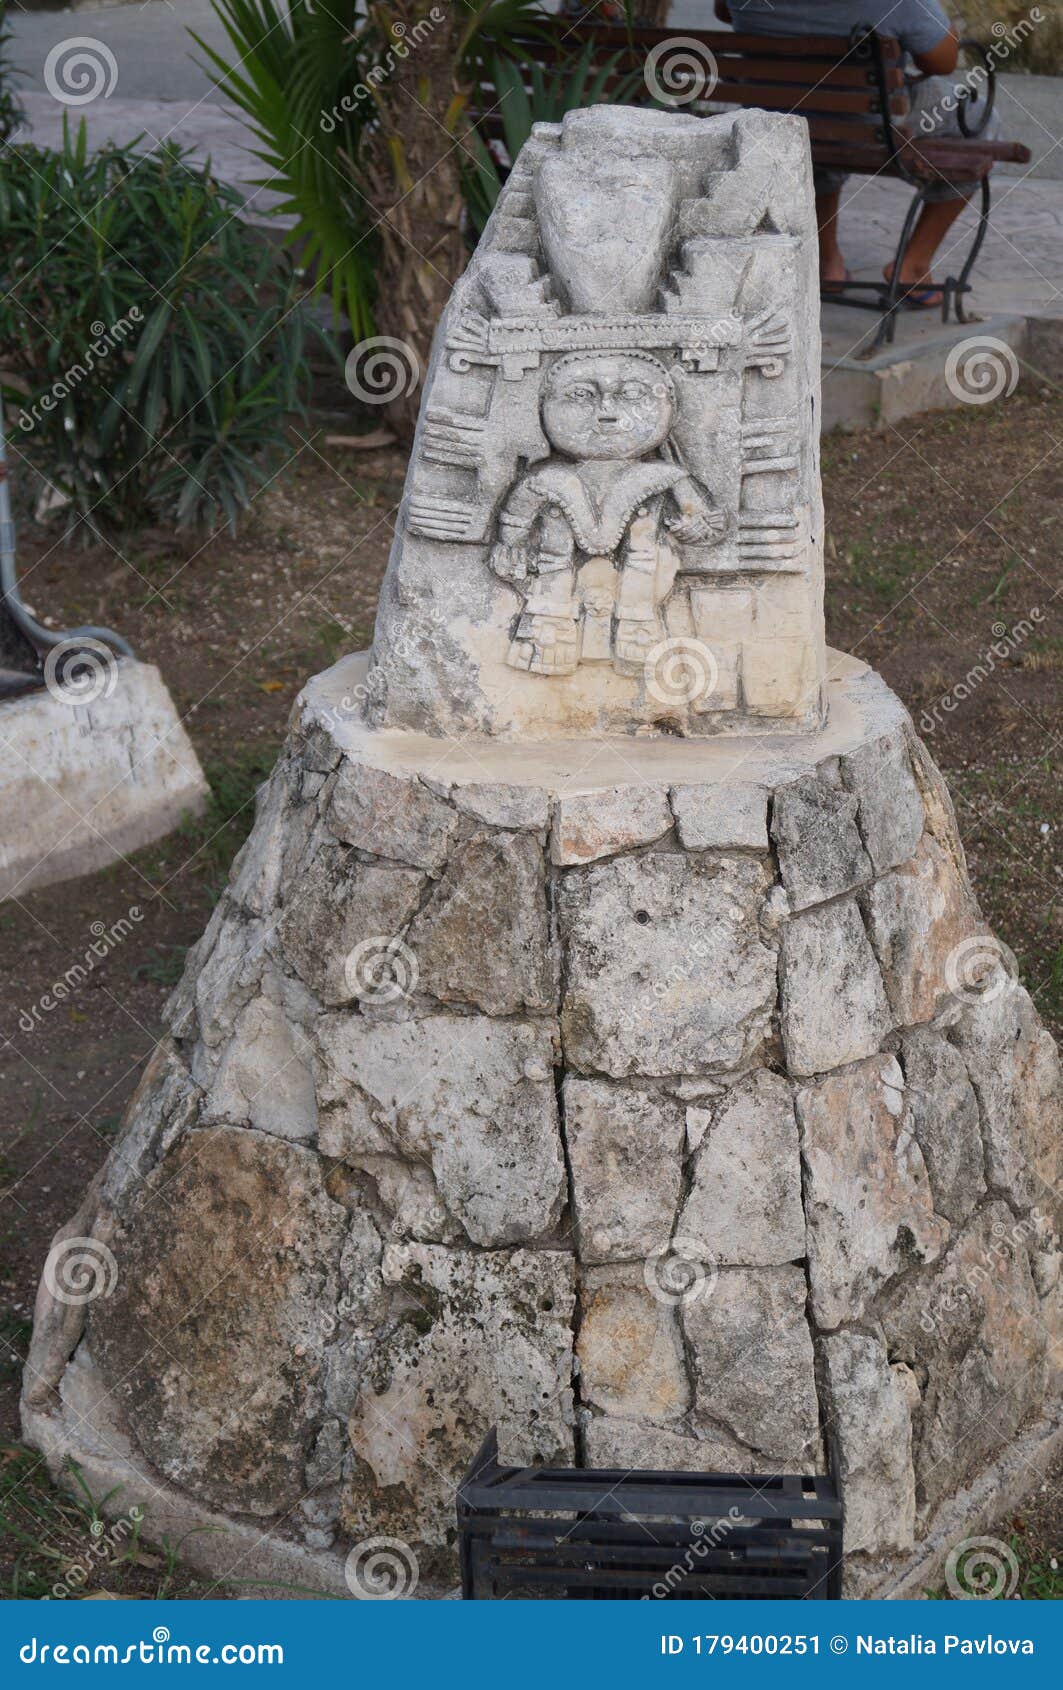 statue in the city of tulum. tulum was one of the last cities built and inhabited by the mayans.  mexico